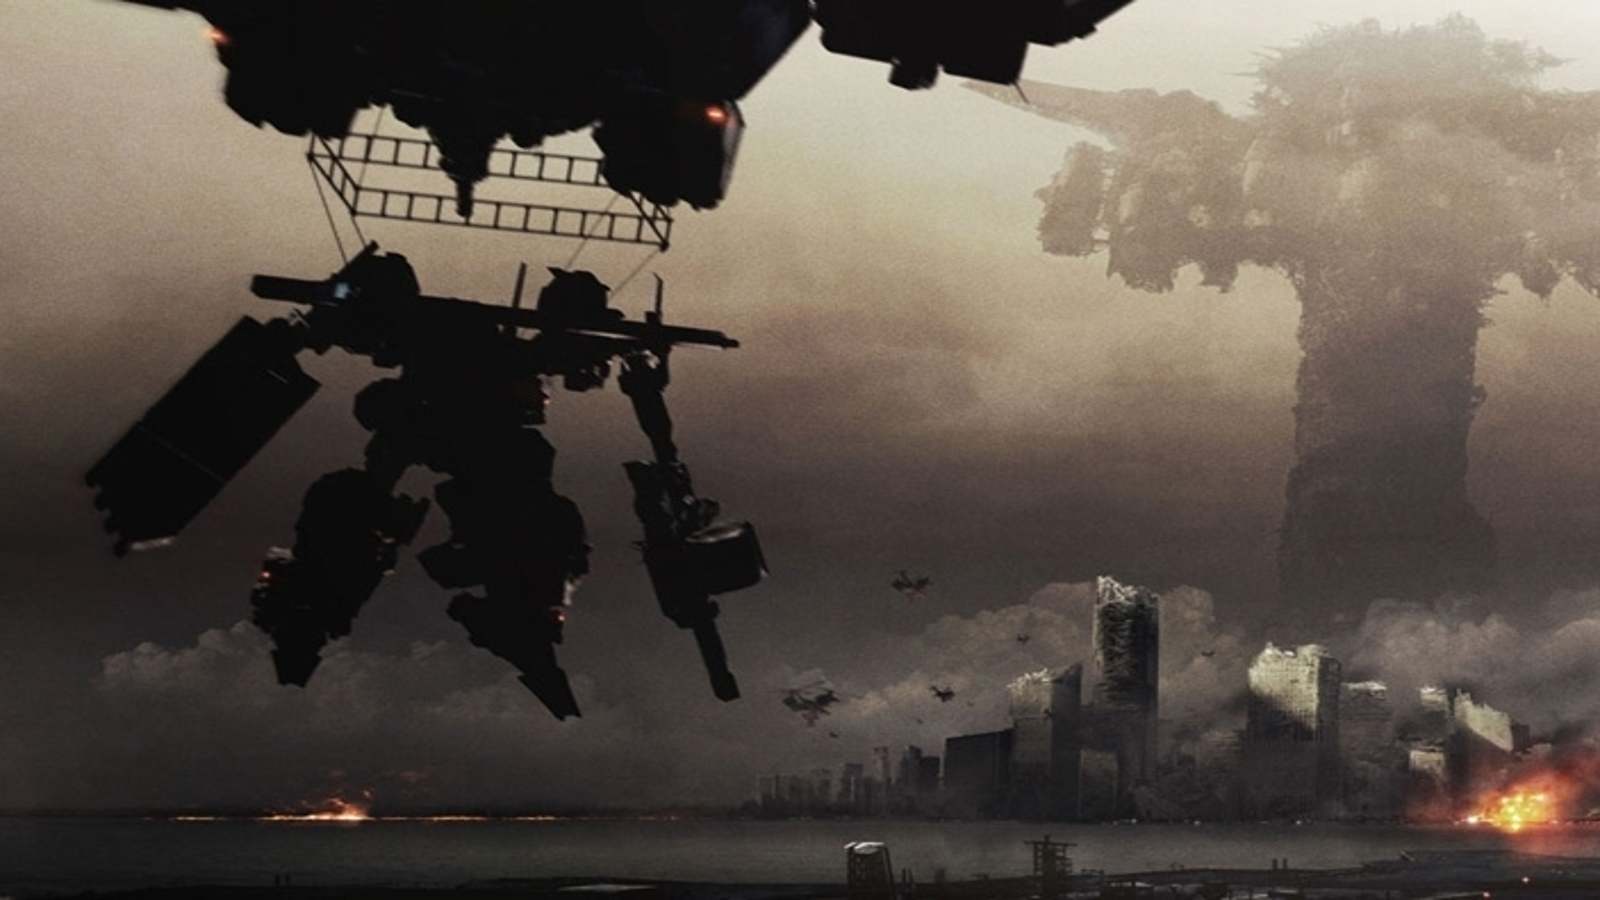 Armored Core Verdict Day Review